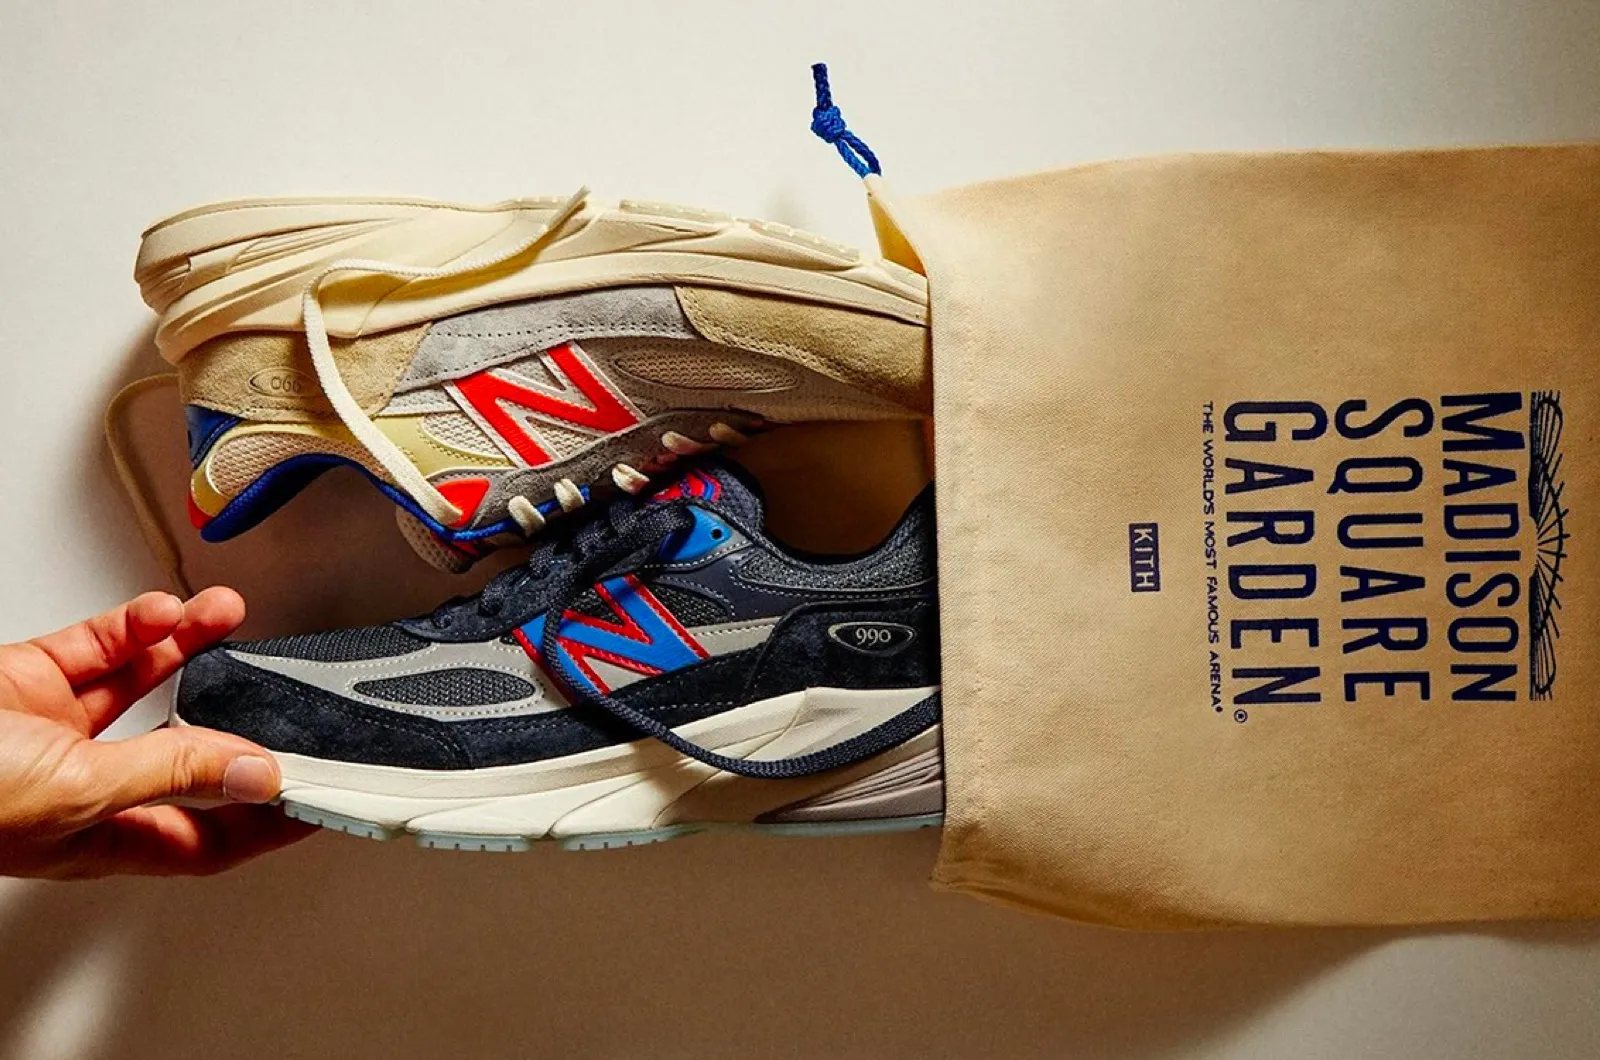 Kith x New Balance 990v6 2 Kith and New Balance Celebrate the Knicks and MSG with the 990v6 Pack